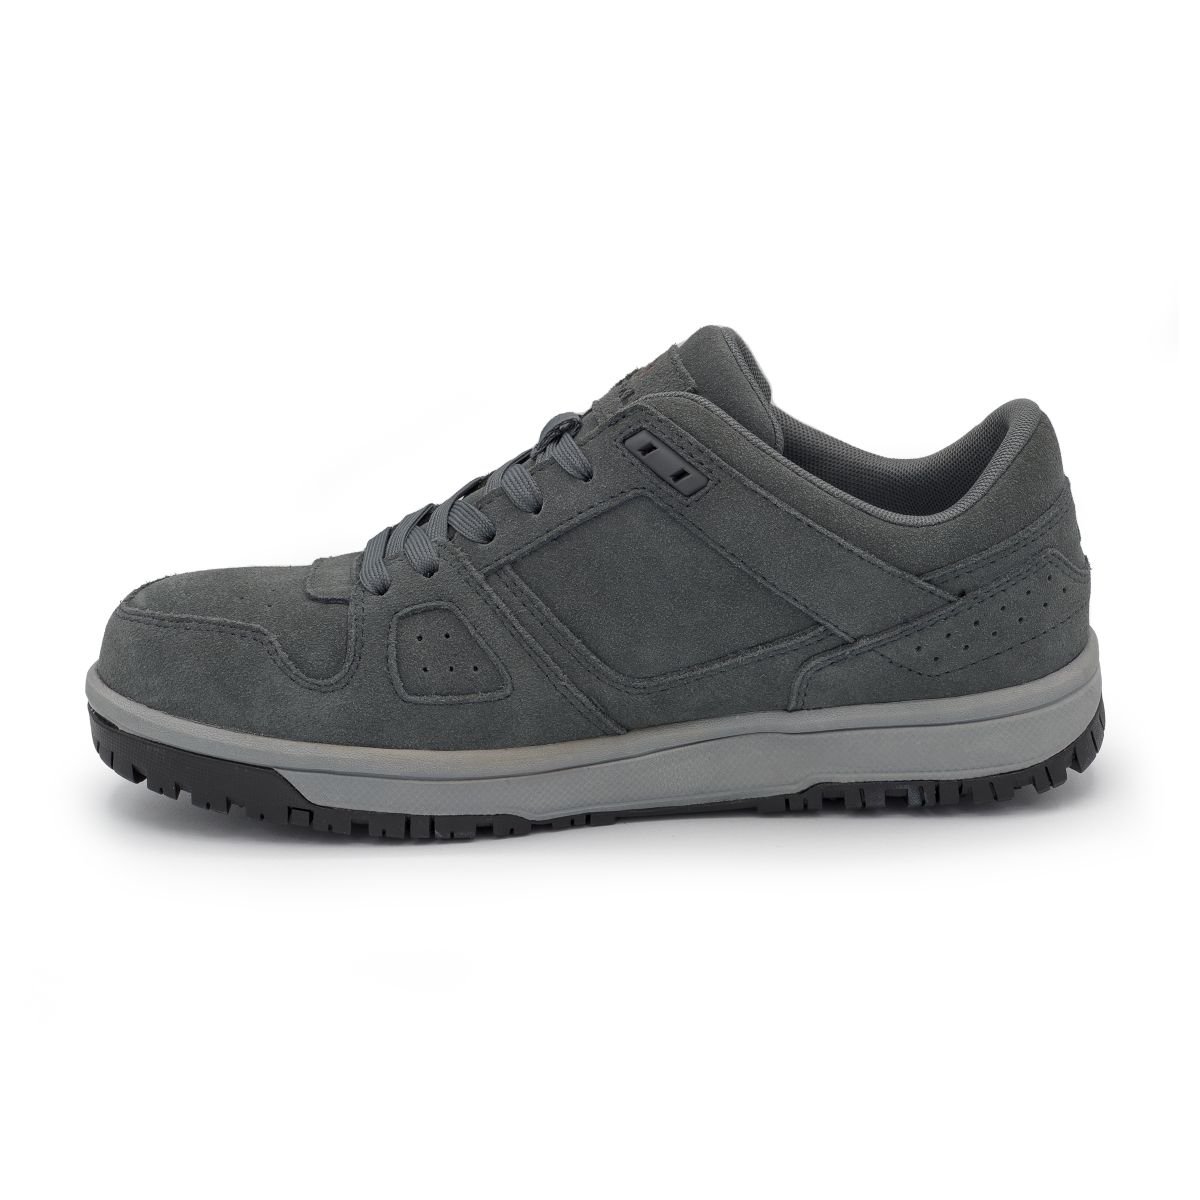 AIRWALK SAFETY Men's Mongo Composite Toe EH Work Shoe Charcoal/Grey - AW6301 CHARCOAL/GRAY - CHARCOAL/GRAY, 13-M